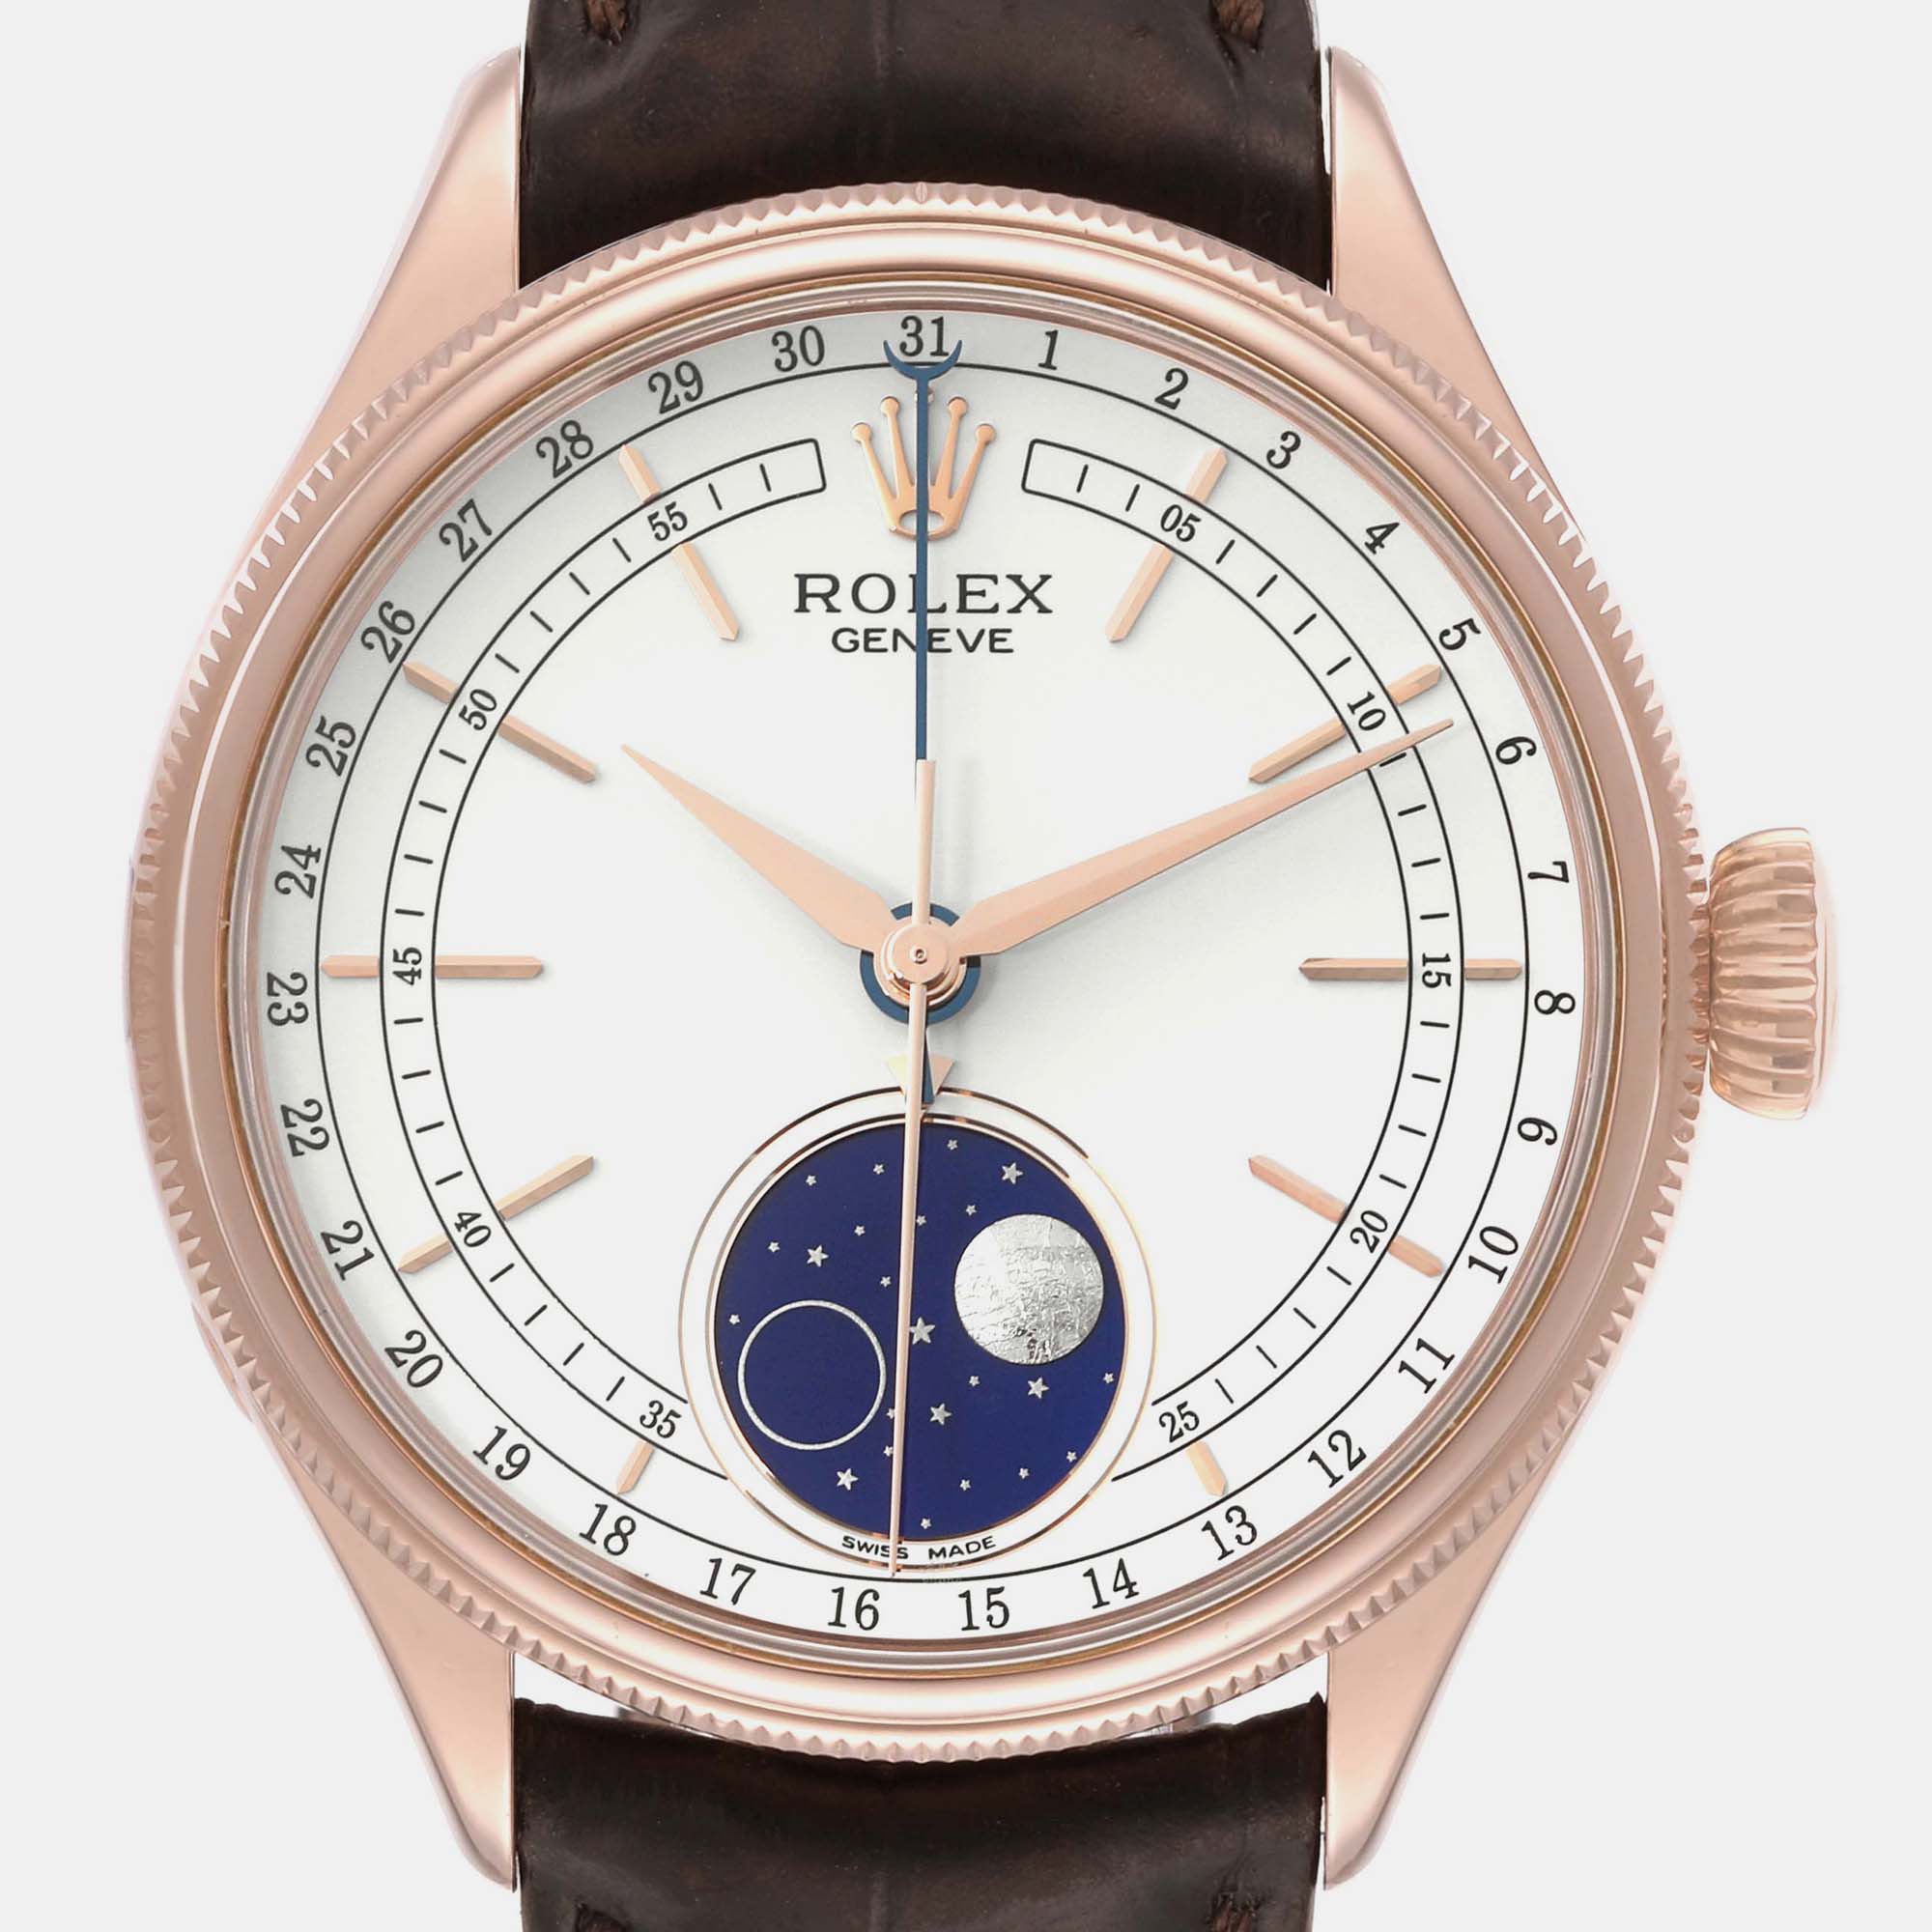 Rolex Cellini Moonphase White Dial Rose Gold Mens Watch 50535 39 Mm